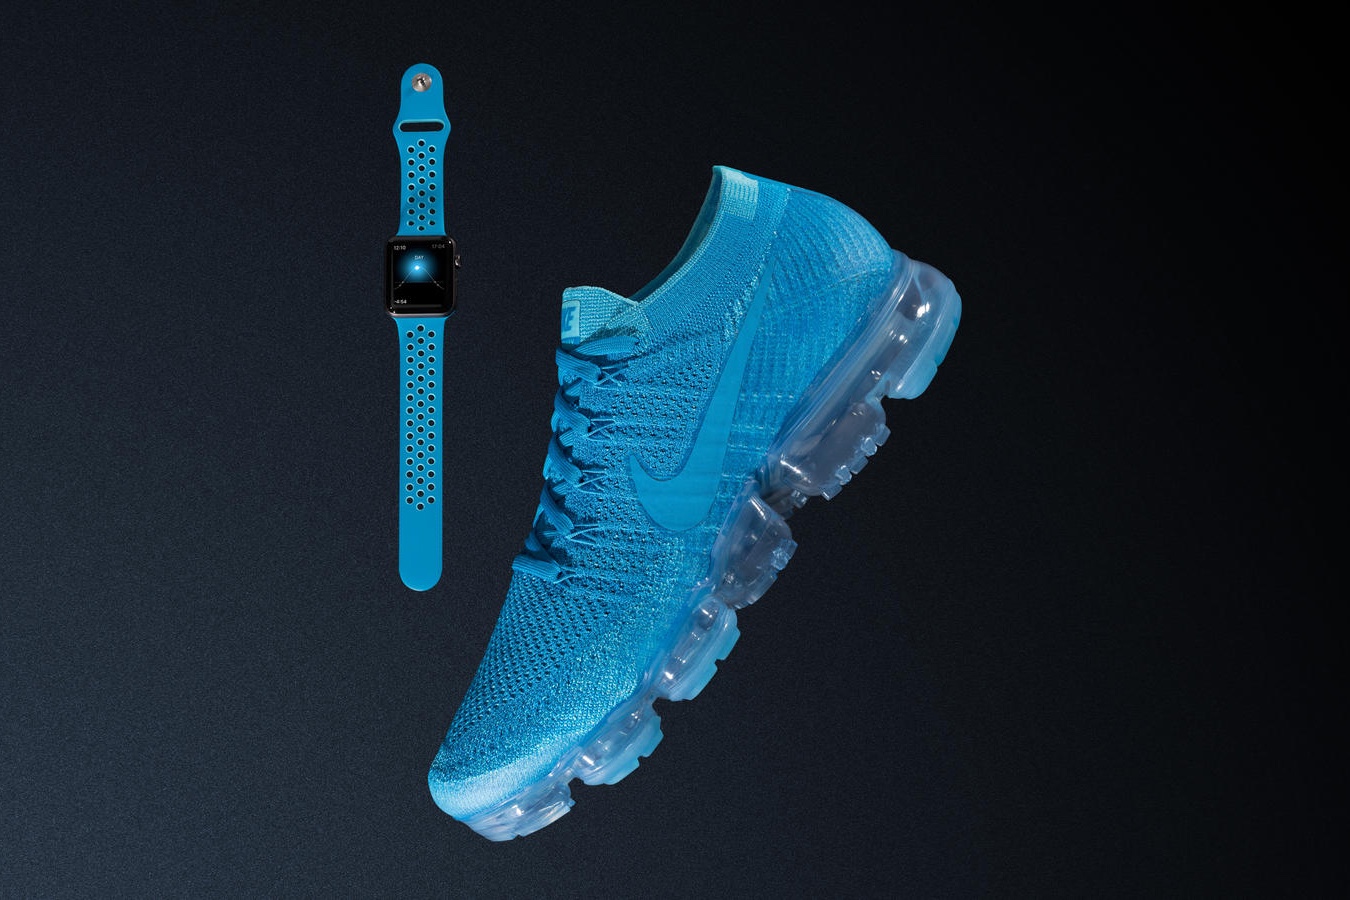 Nike x Apple Watch Bands Match the Air VaporMax “Day to Night” Pack